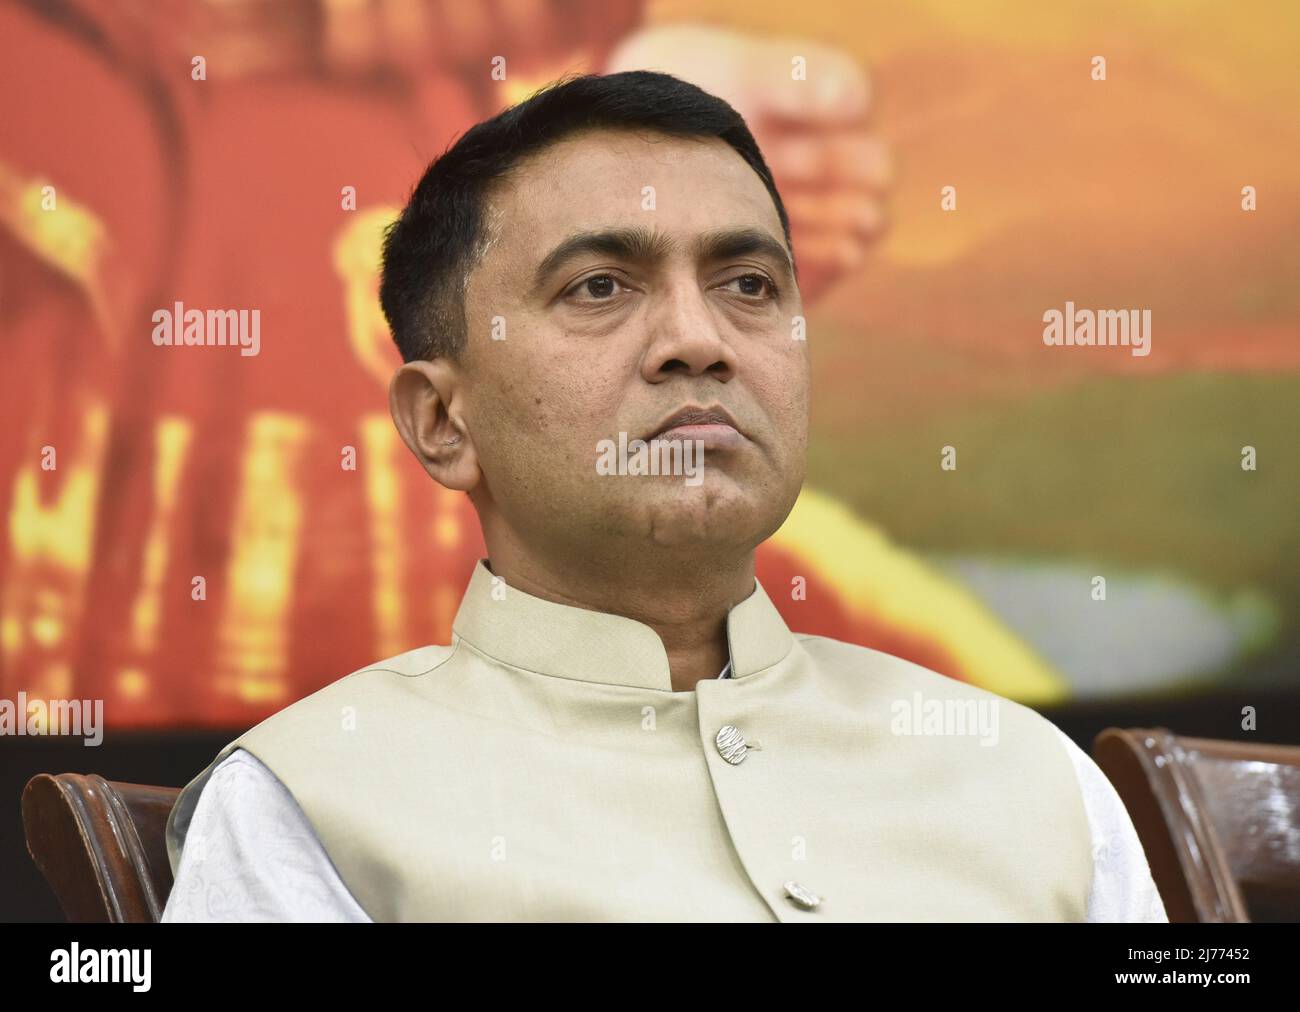 NEW DELHI, INDIA - MAY 6: Chief Minister of Goa Pramod Sawant, during the Inaugurating the Adiguru Shankaracharya Jayanti Celebrations at Constitution Club of India on May 6, 2022 in New Delhi, India. May 6 marks the 1234th birth anniversary of Adi Shankaracharya. Adi Shankara, also known as Jagatguru Shankaracharya, continues to be one of the significant religious leaders and philosophers of India (Photo by Sonu Mehta/Hindustan Times/Sipa USA) Stock Photo